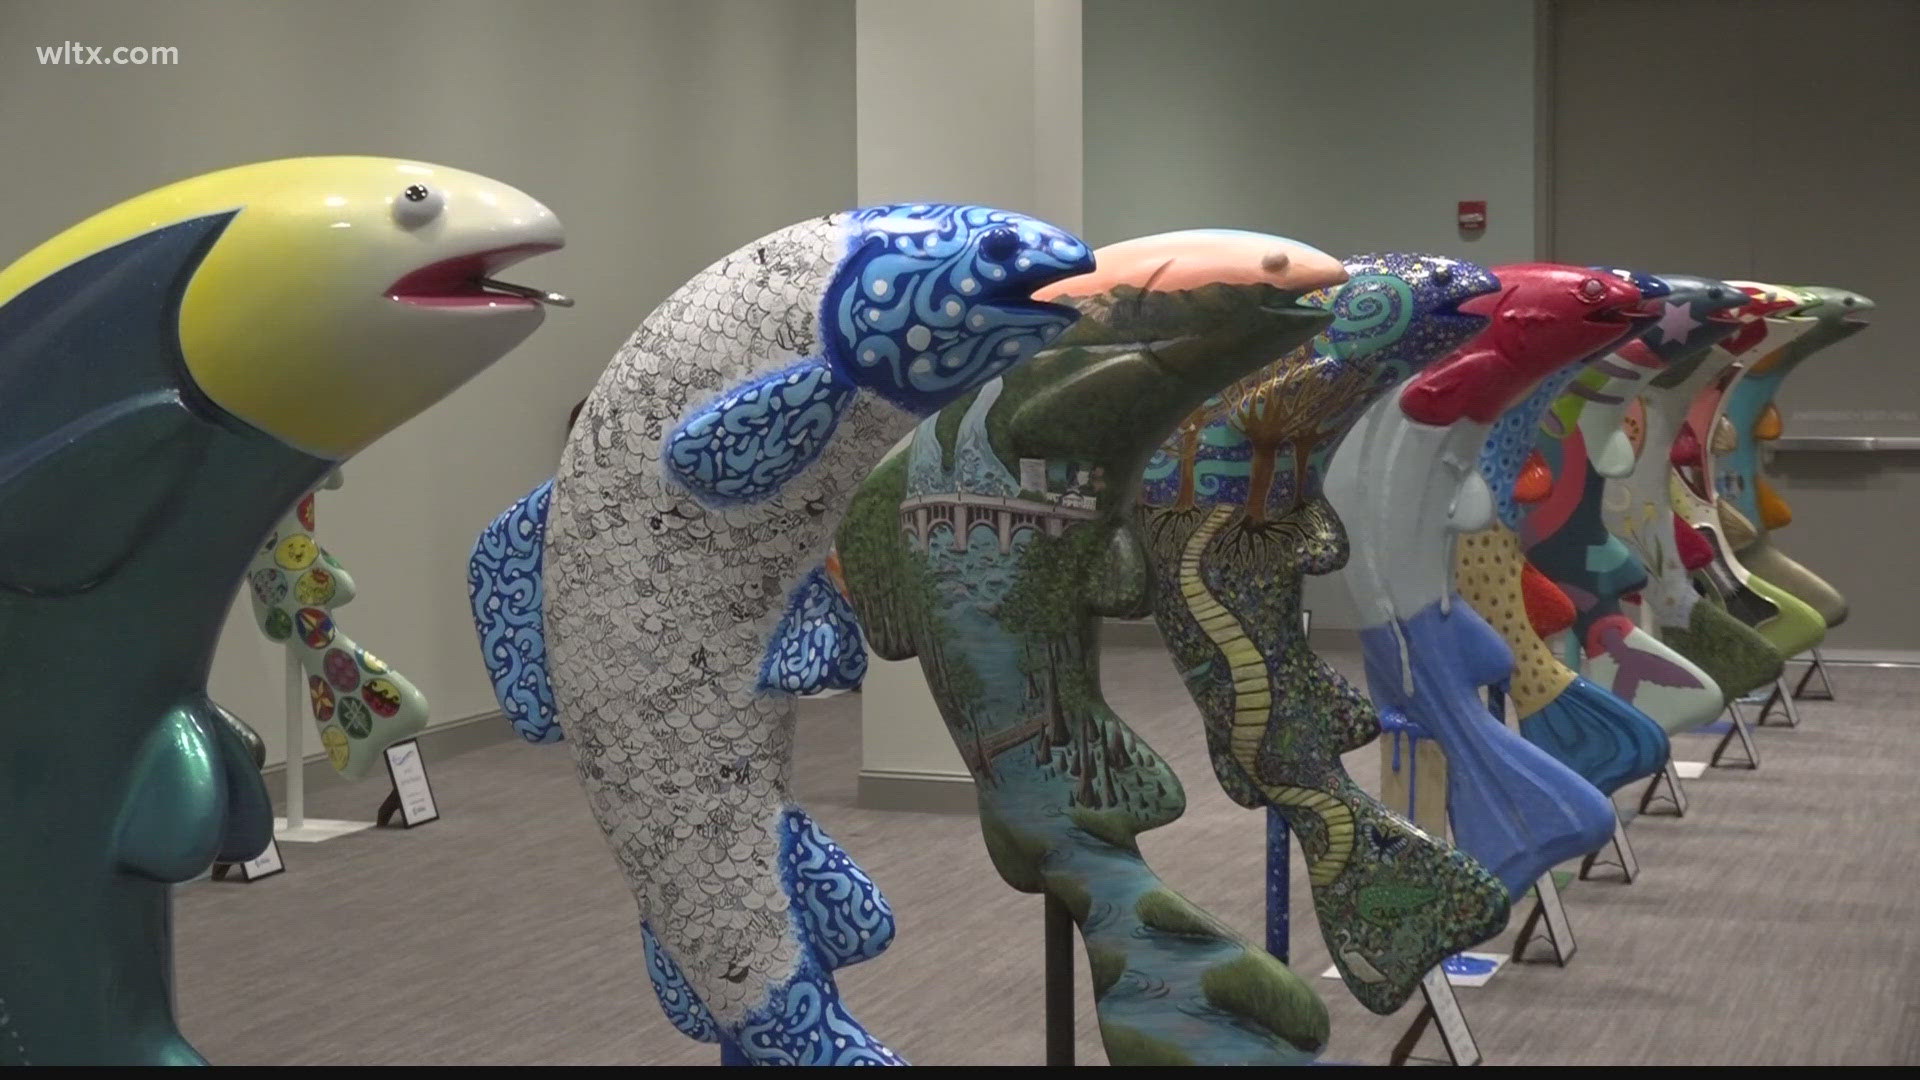 The sculptures are painted by local artists to raise money for Columbia's first public arts fund.